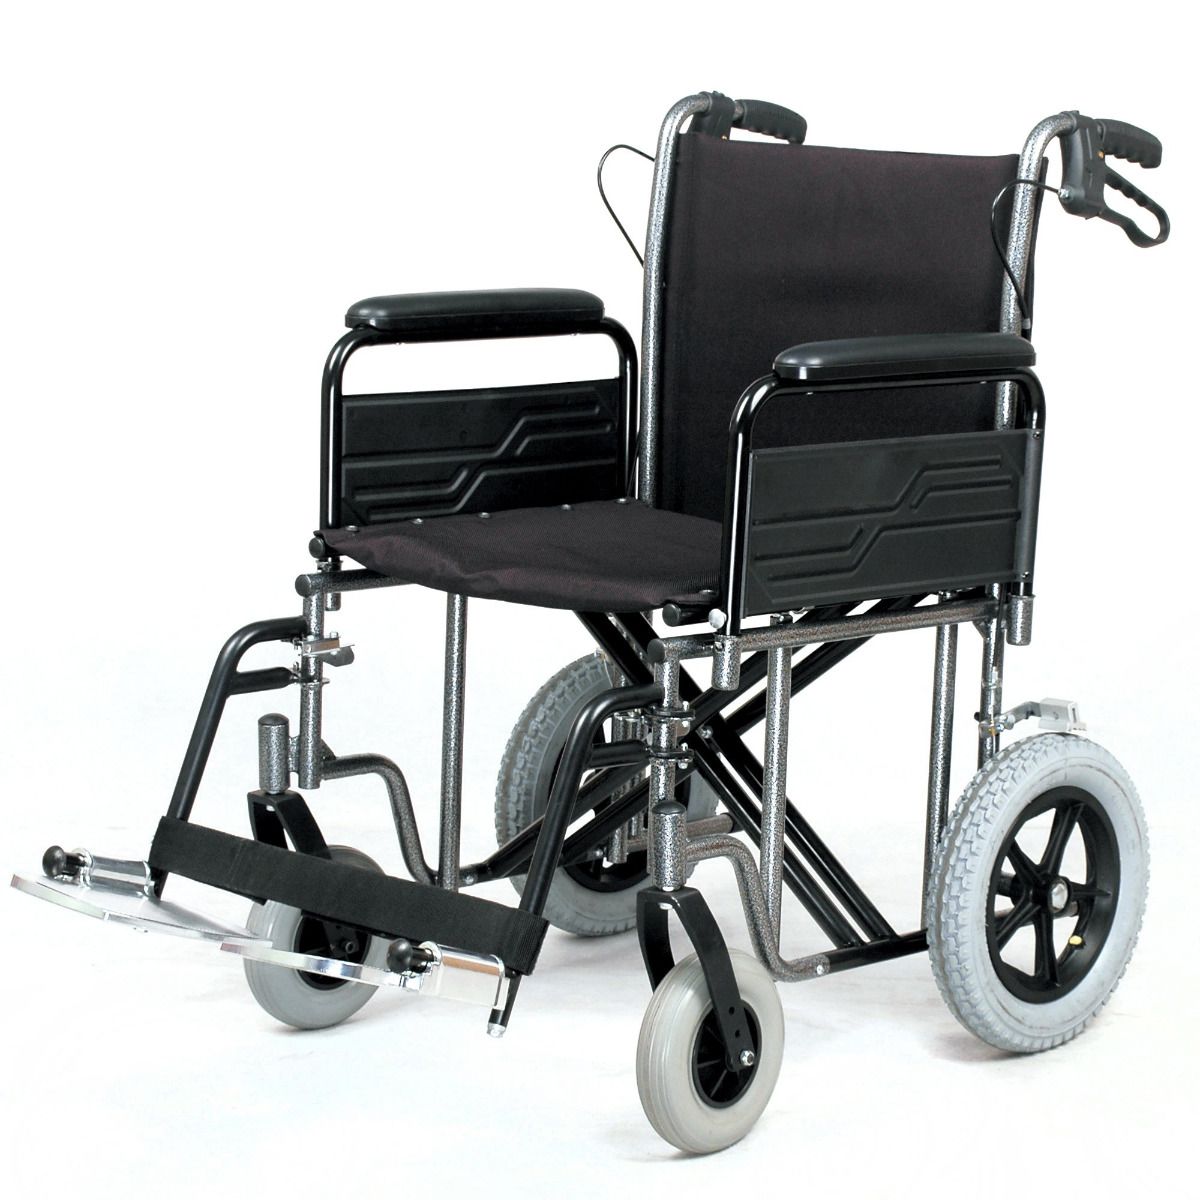 Roma Medical 1485X HD Bariatric Transit Wheelchair shown from the side view